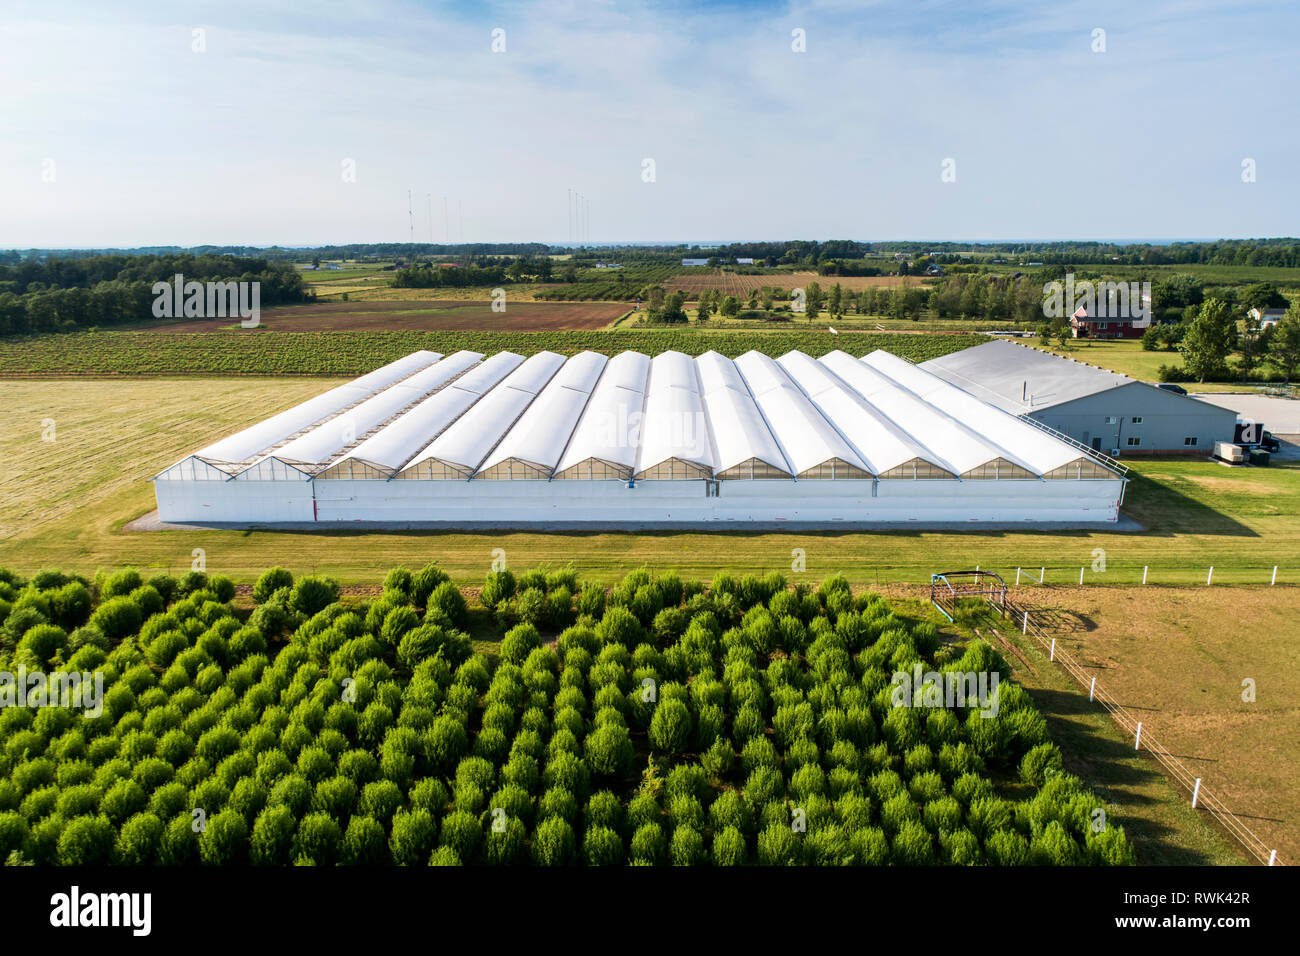 Aerial view of greenhouses with orchard in the foreground; Vineland, Ontario, Canada Stock Photo